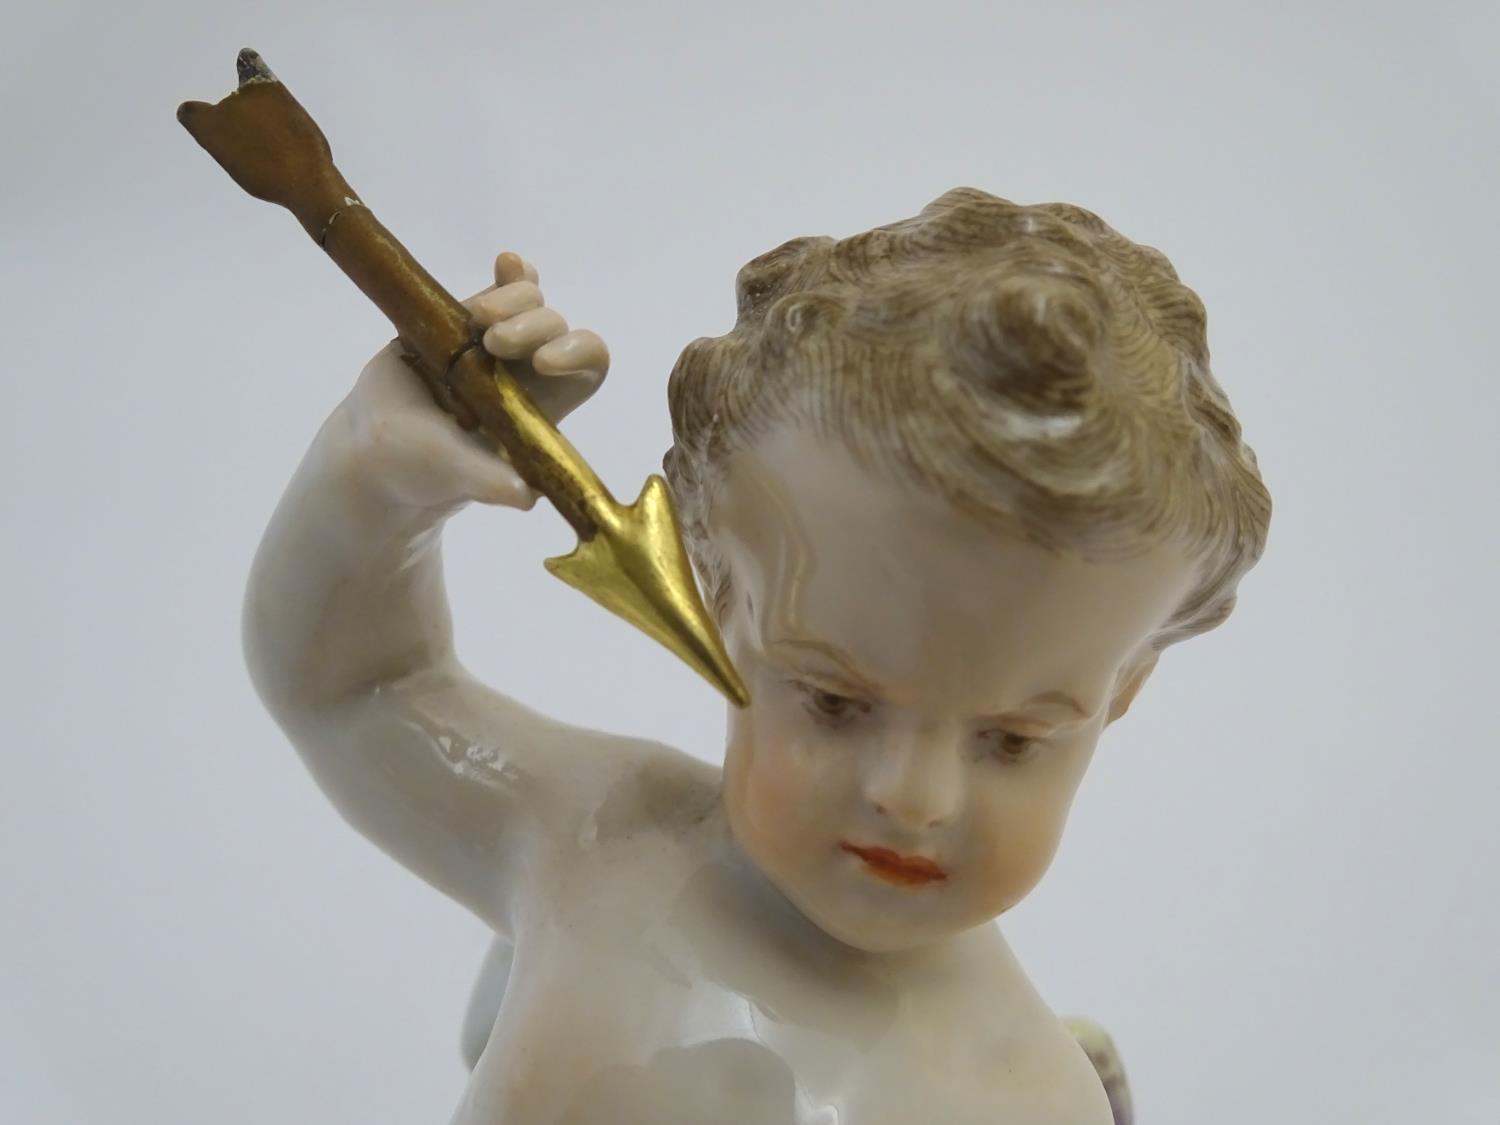 A late 19thC Meissen figure of Cupid holding an arrow and a flaming heart. On a naturalistic base. - Image 6 of 9